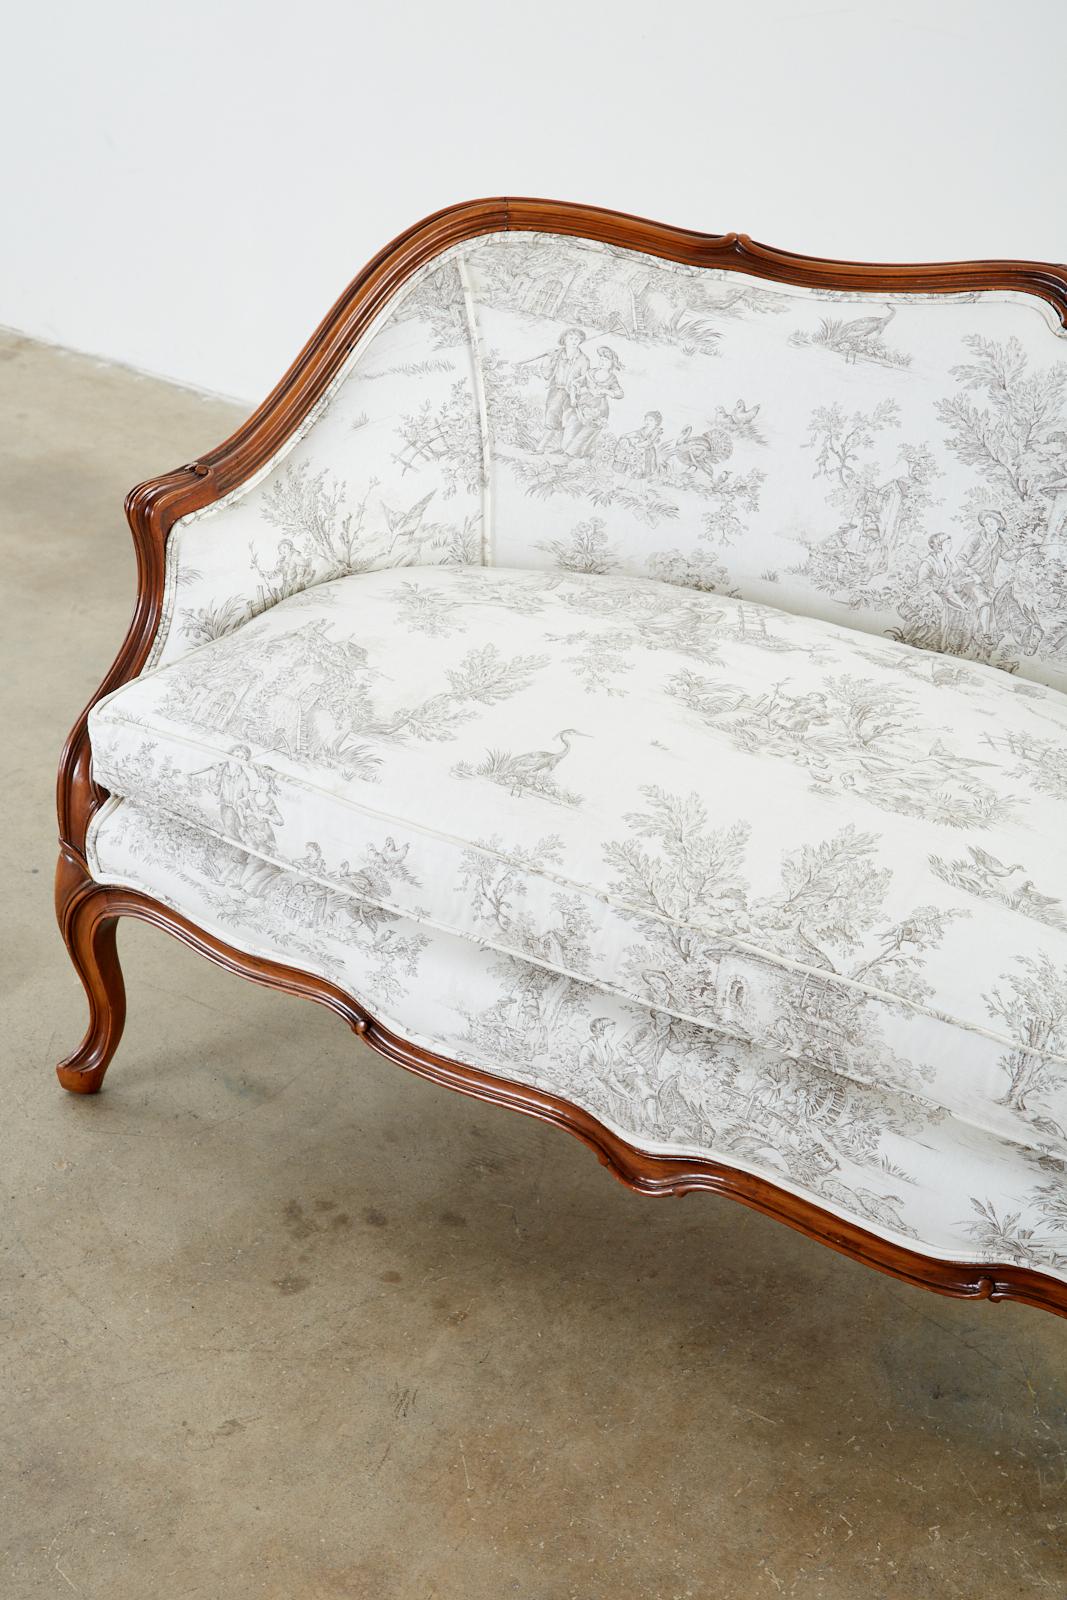 20th Century French Provincial Style Walnut Toile De Jouy Settee